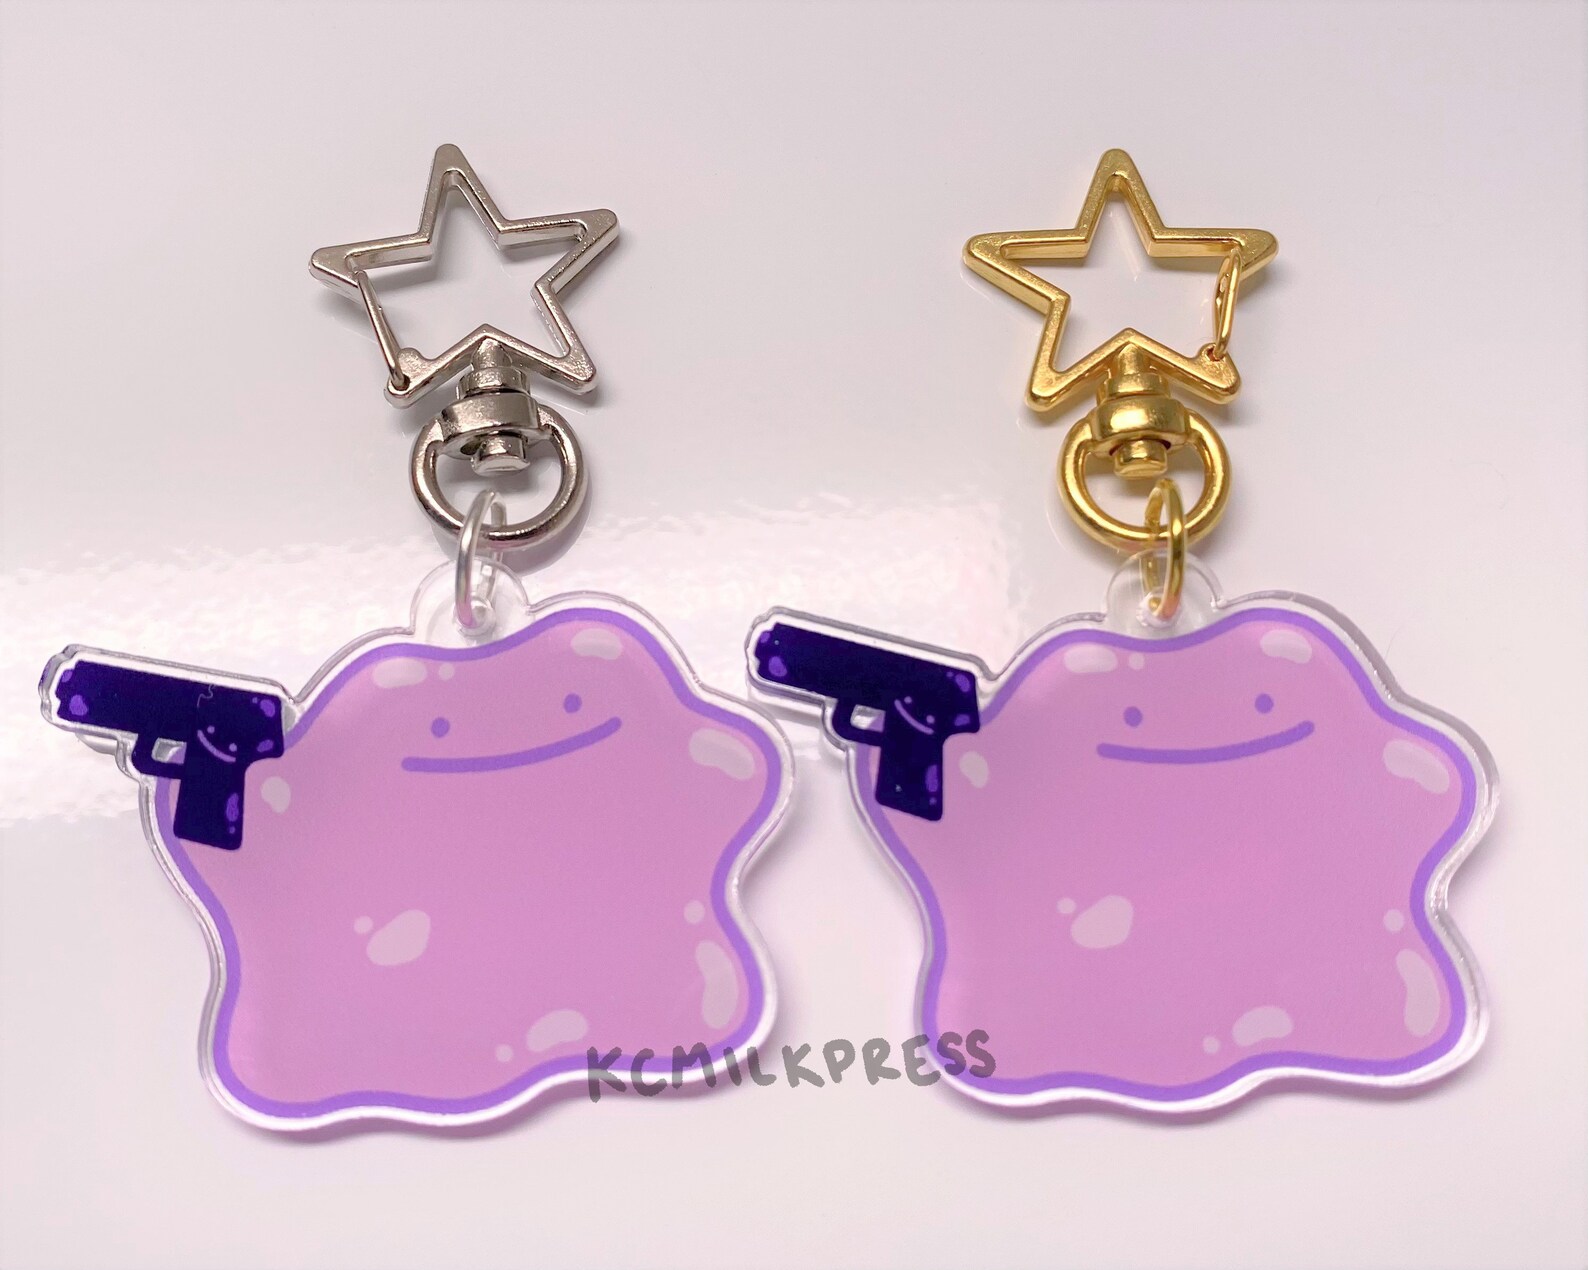 Ditto with gun acrylic charm | Etsy